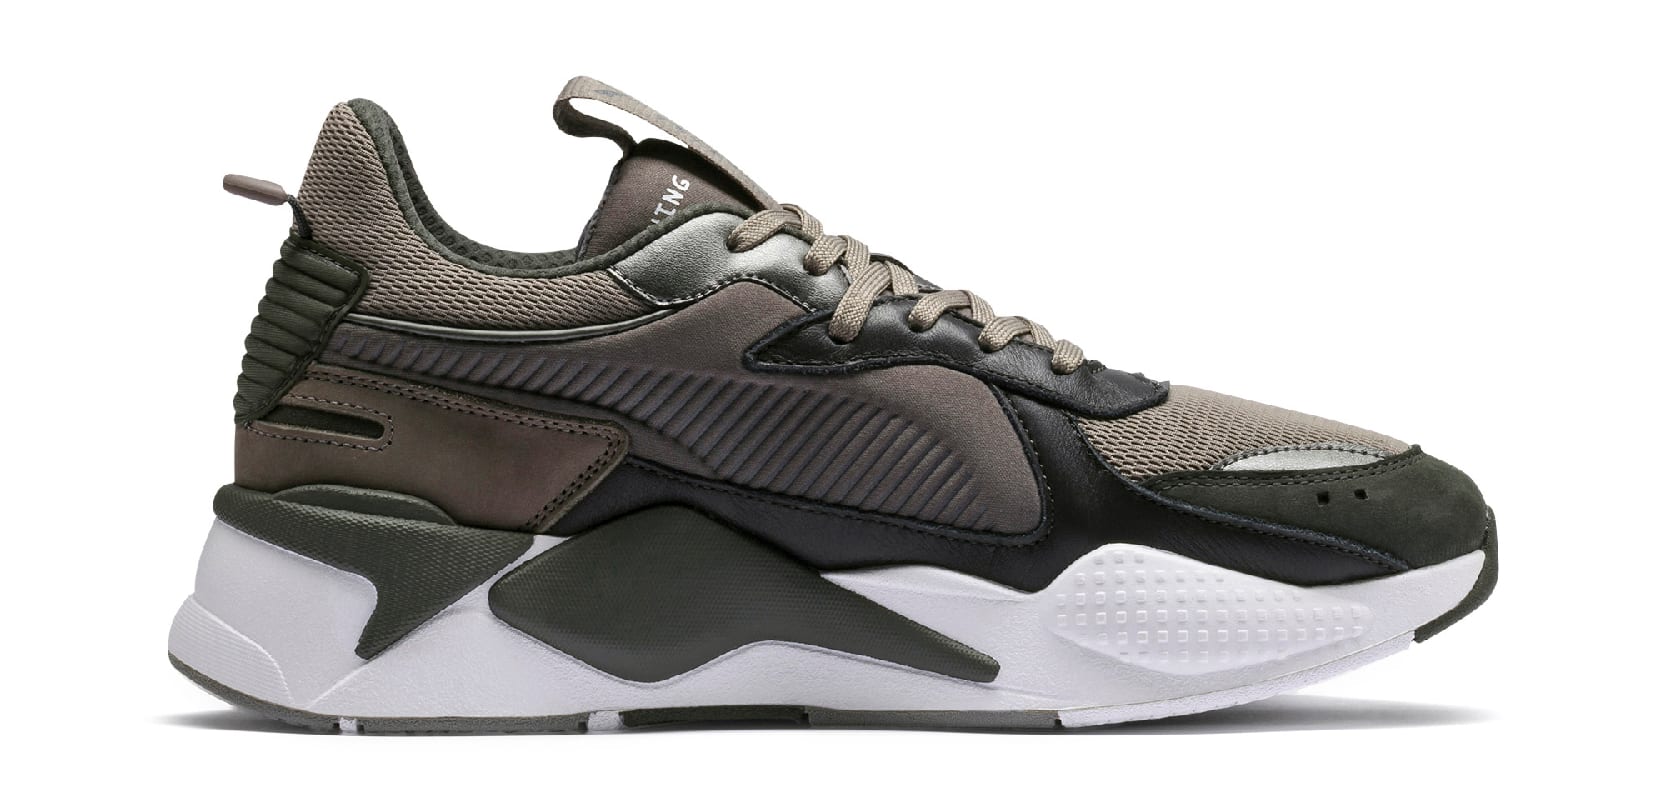 puma-rs-x-trophies-olive-369451-03-medial